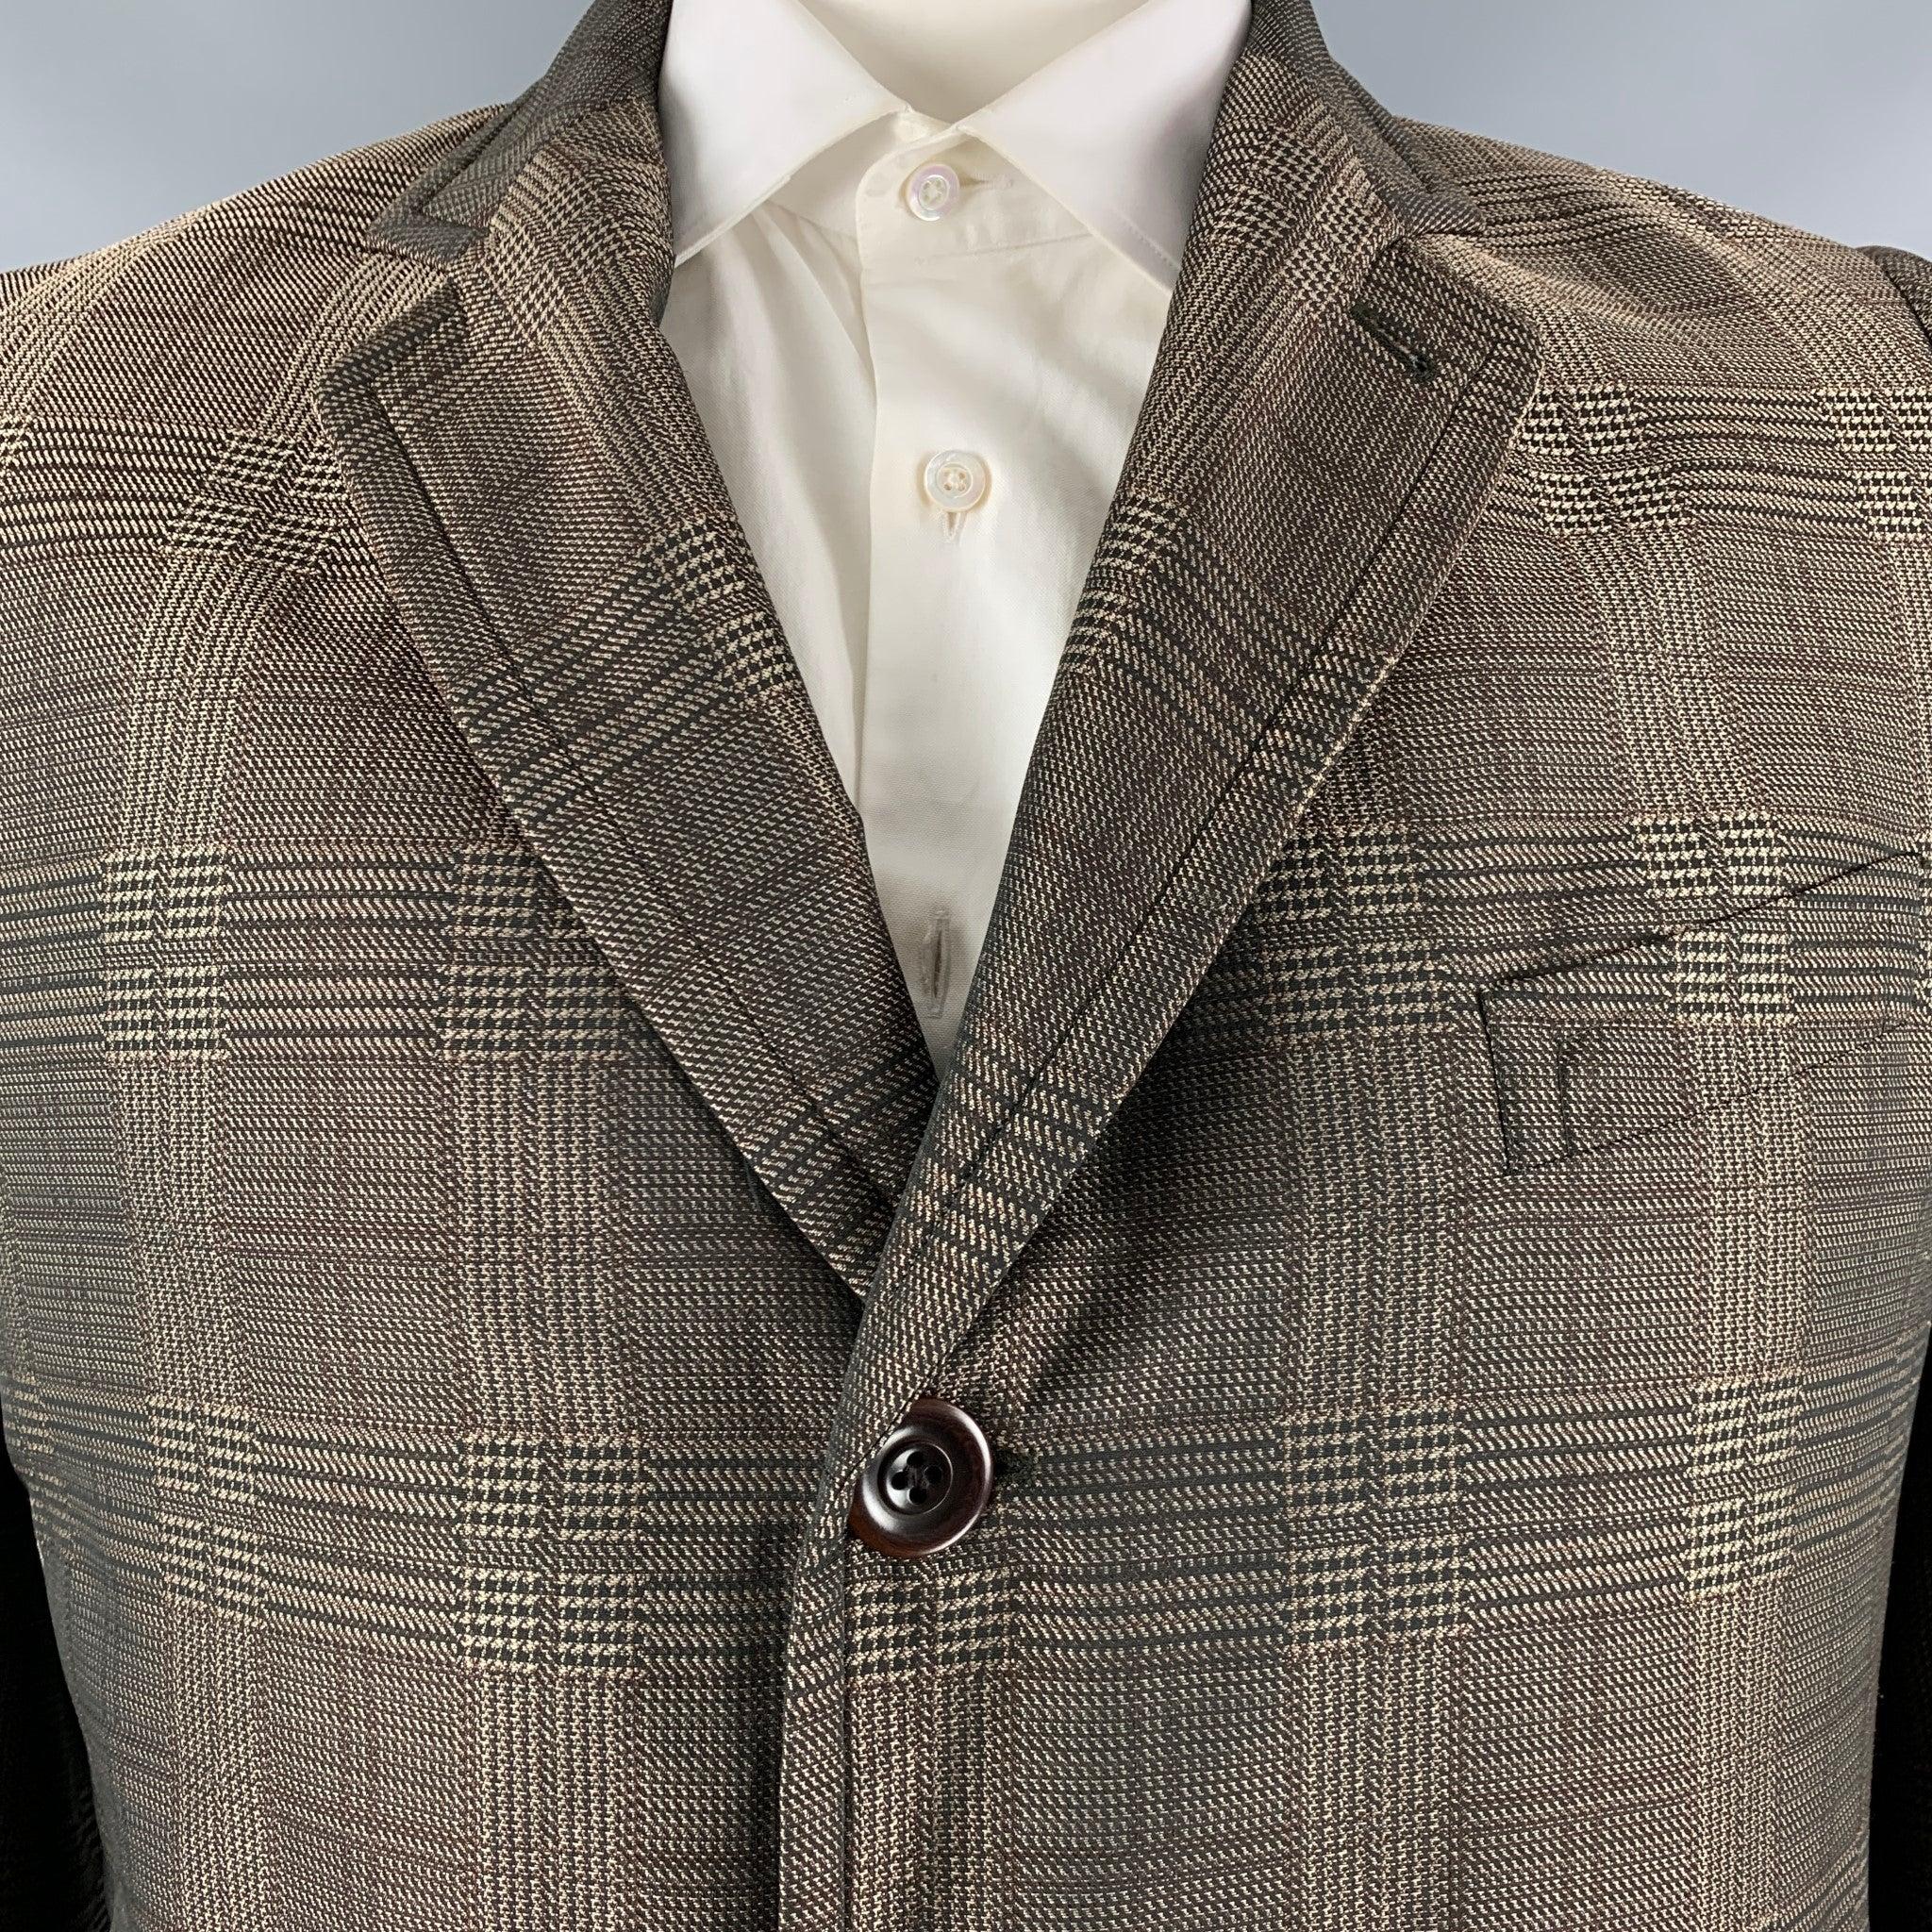 DRIES VAN NOTEN coat comes in a brown and taupe glenplaid polyester woven material with full grey plaid liner featuring a notch lapel, single breasted, double button front, and welt pockets. Made in Belgium.Very Good Pre-Owned Condition. Moderate